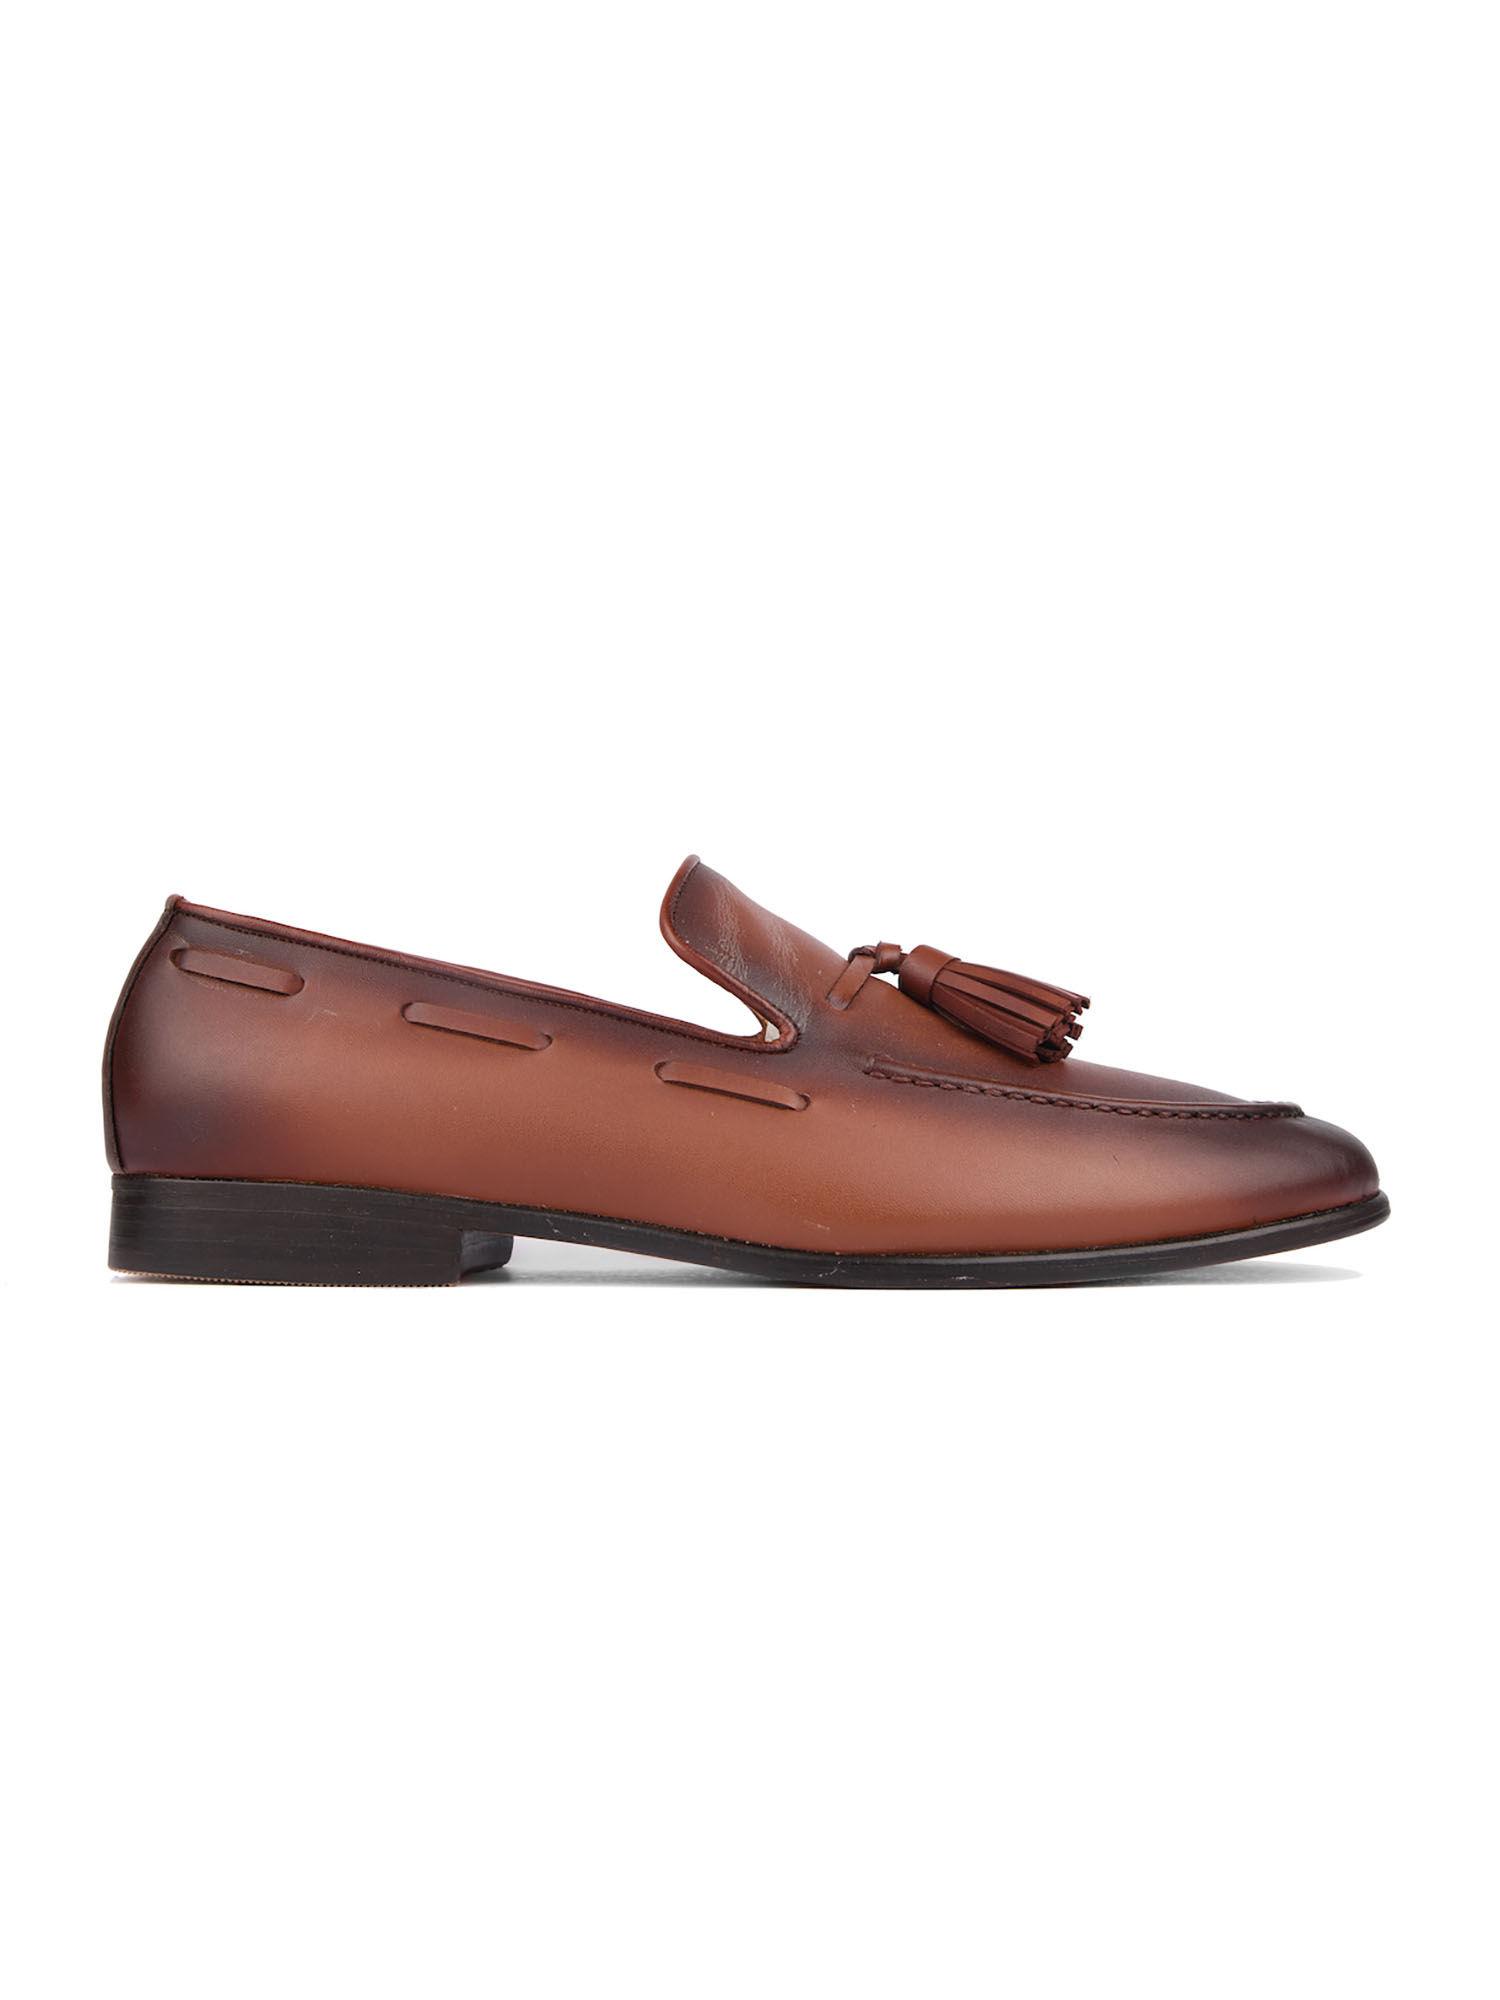 bari4 two toned tan leather loafers